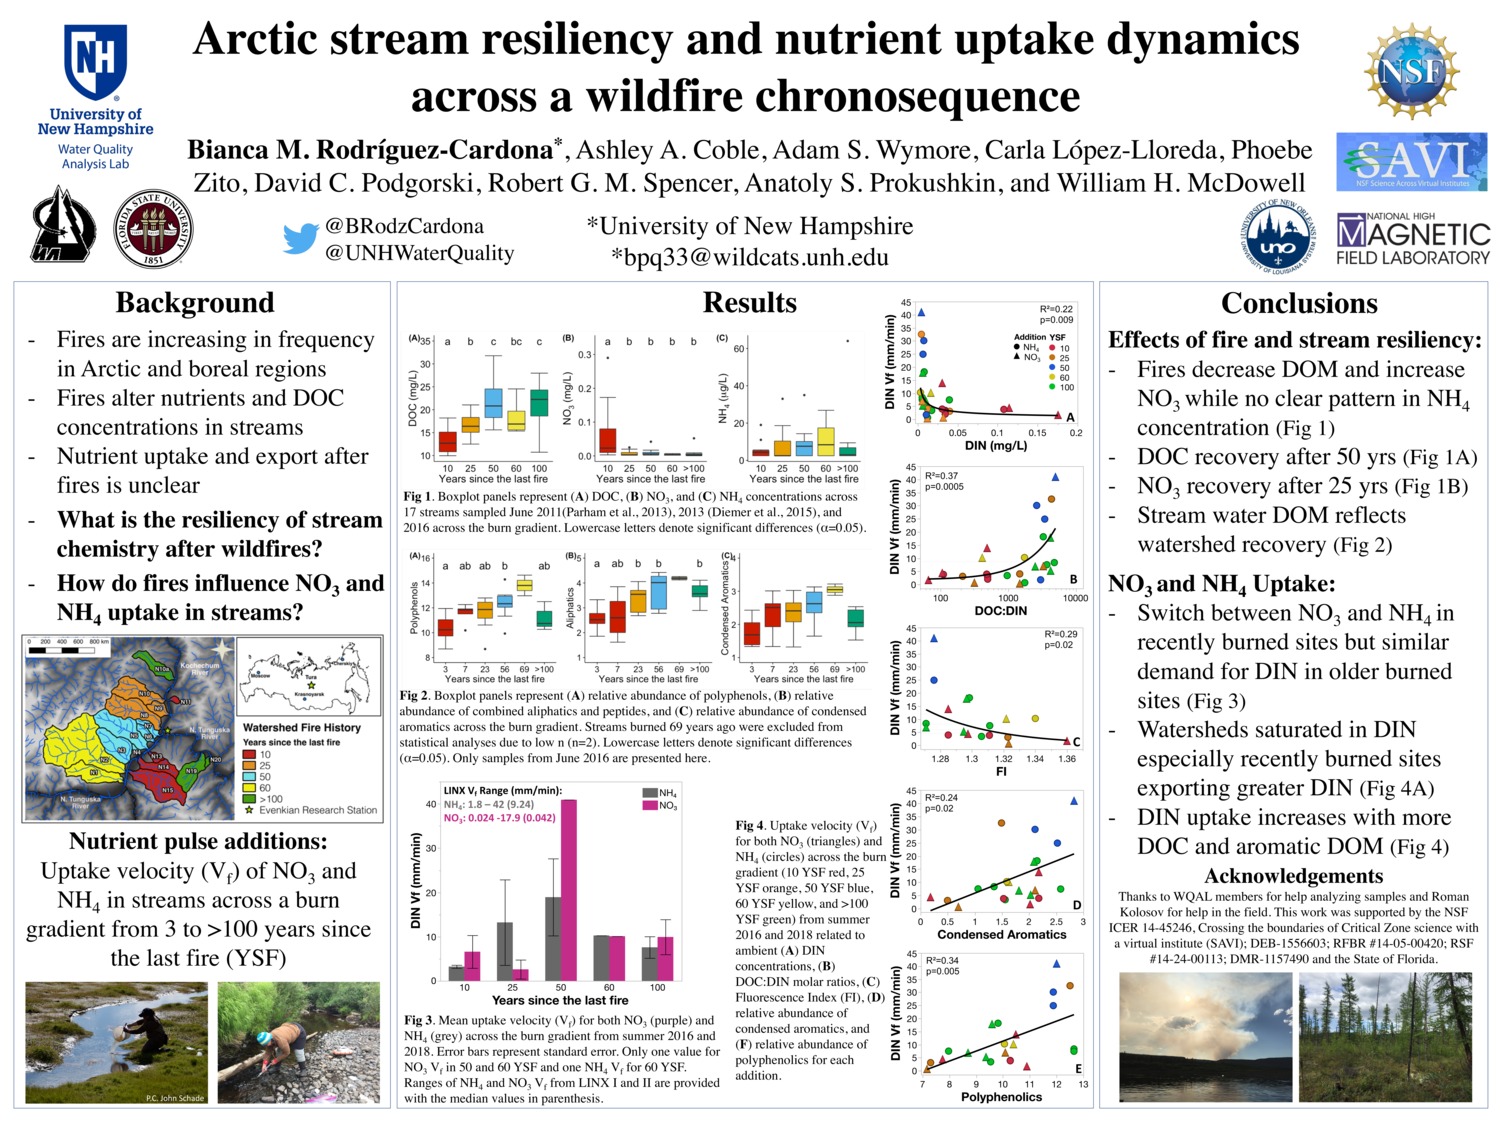 Arctic Stream Resiliency And Nutrient Uptake Dynamics Across A Wildfire Chronosequence by bpq33